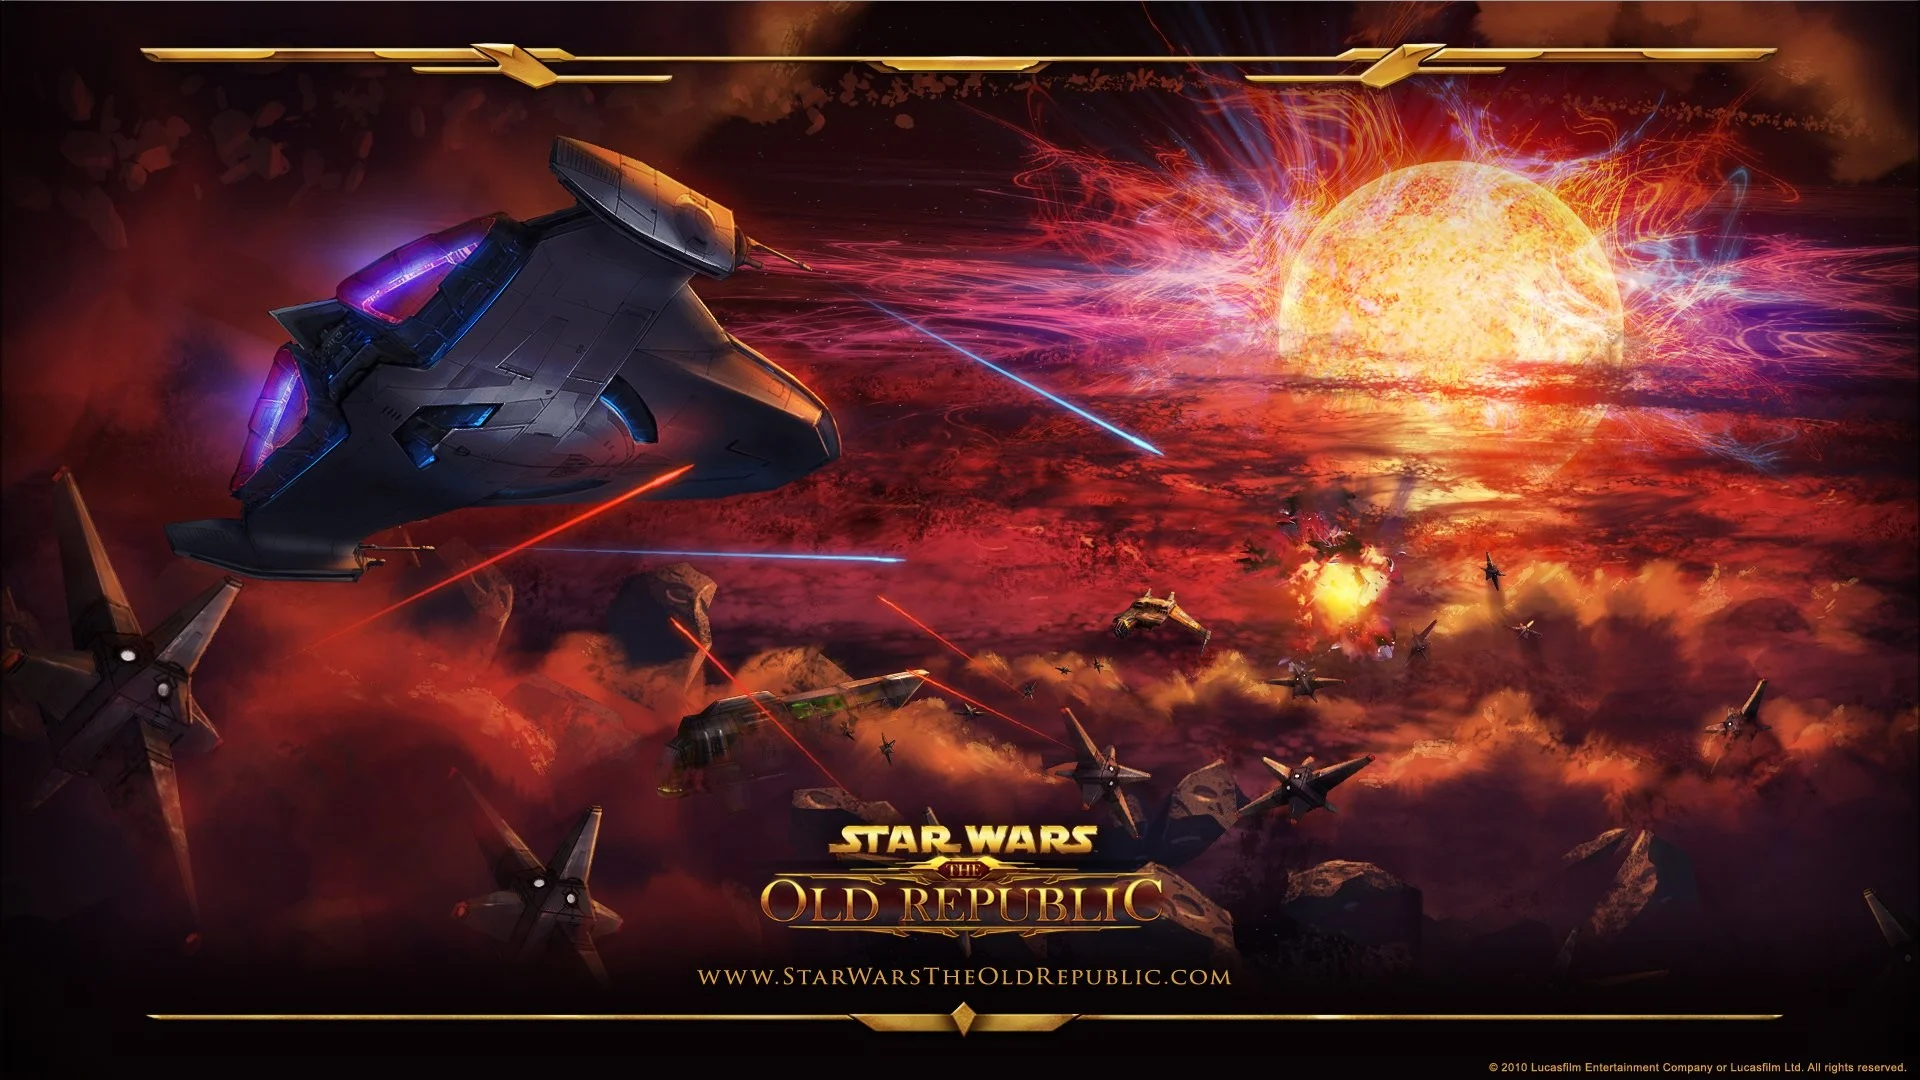 SWTOR Central Your Master Guide to Unlock Star Wars The Old Republic